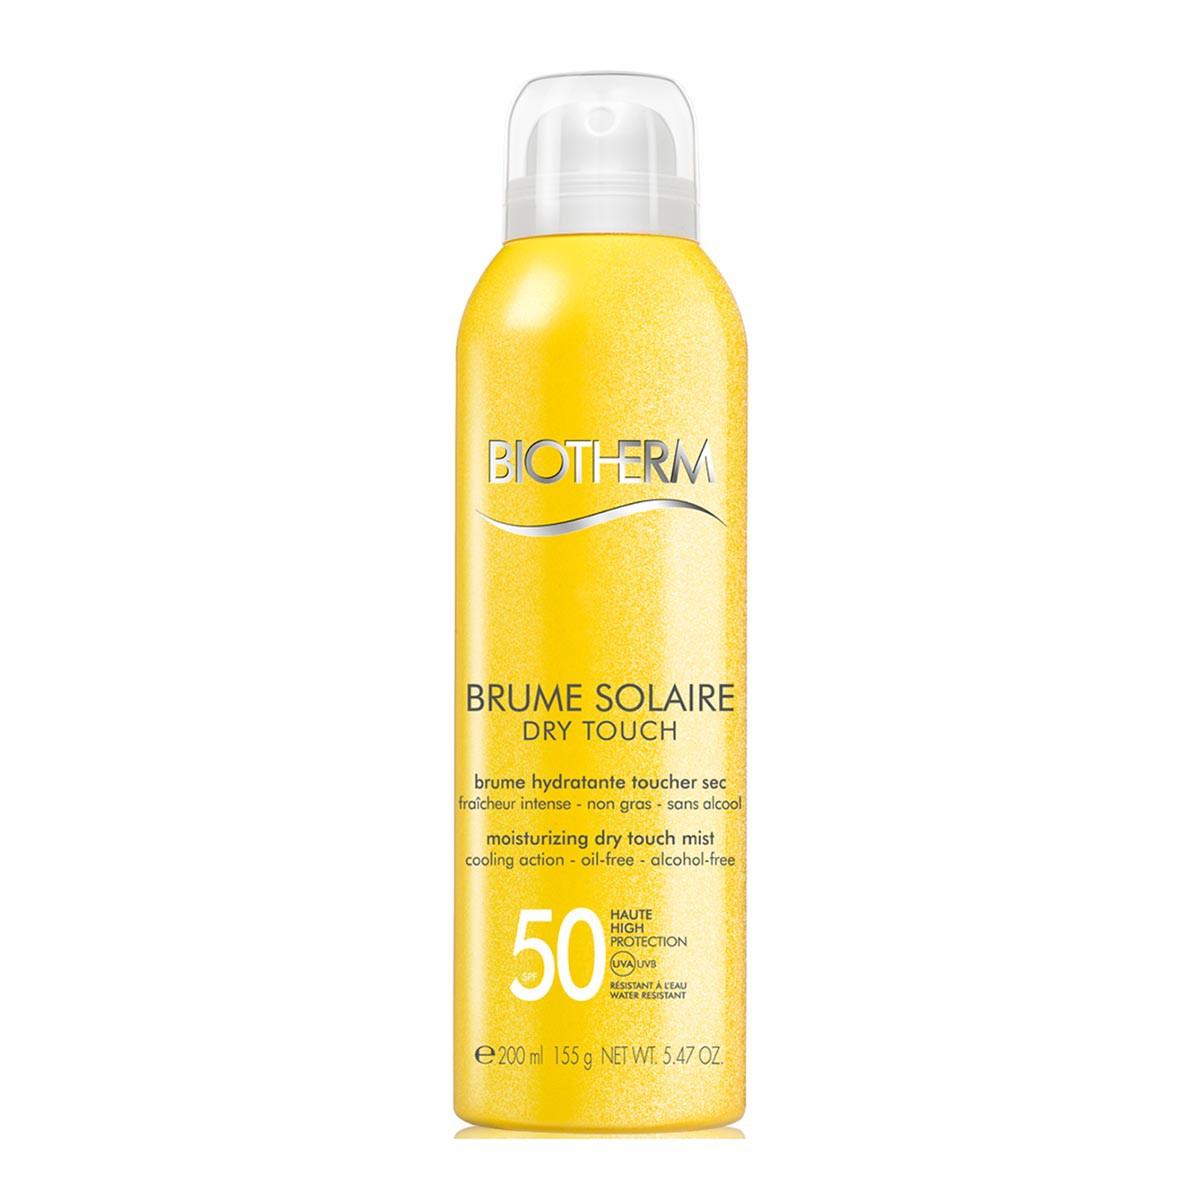 biotherm-brume-solaire-dry-touch-oil-free-spf50-200ml-protector